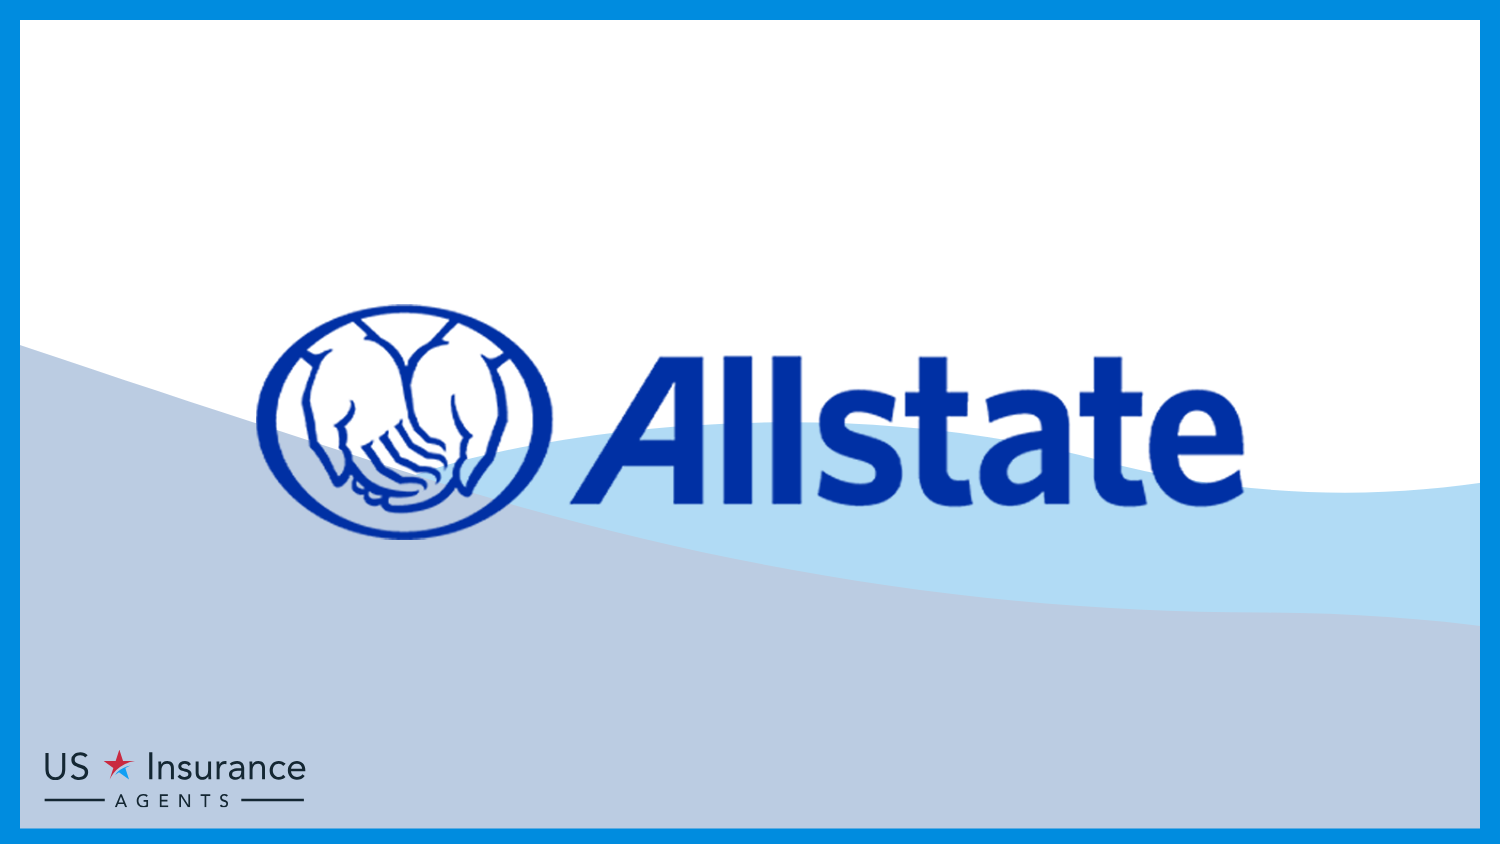 Allstate: Best Business Insurance for Investment Services